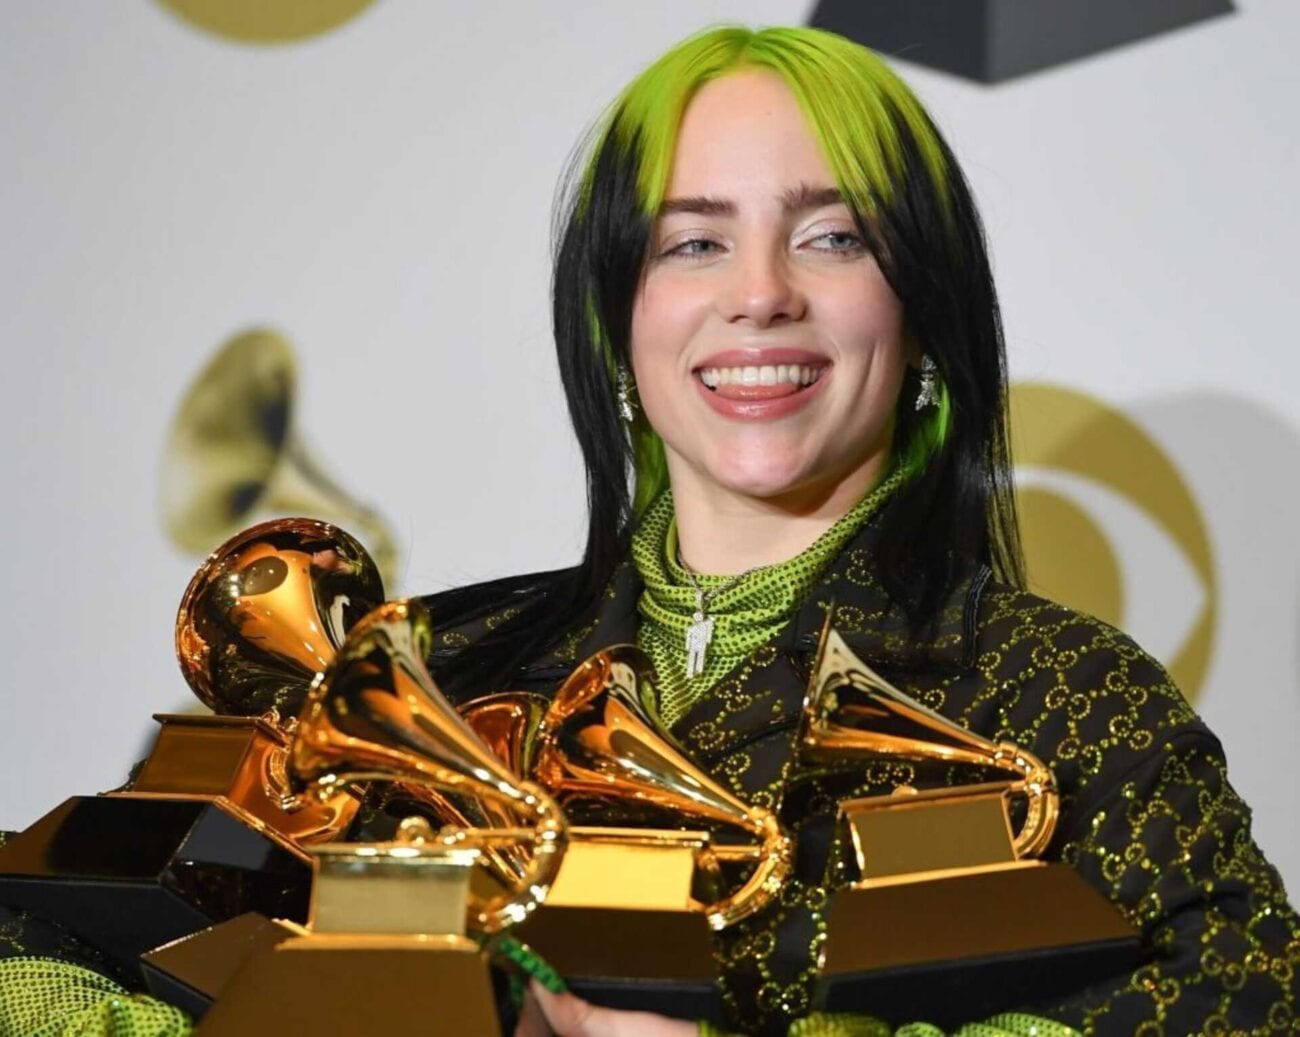 Billie Eilish was caught using a racist slur. Let’s take a look at what the “ocean eyes” singer had to say about the shocking TikTok video.